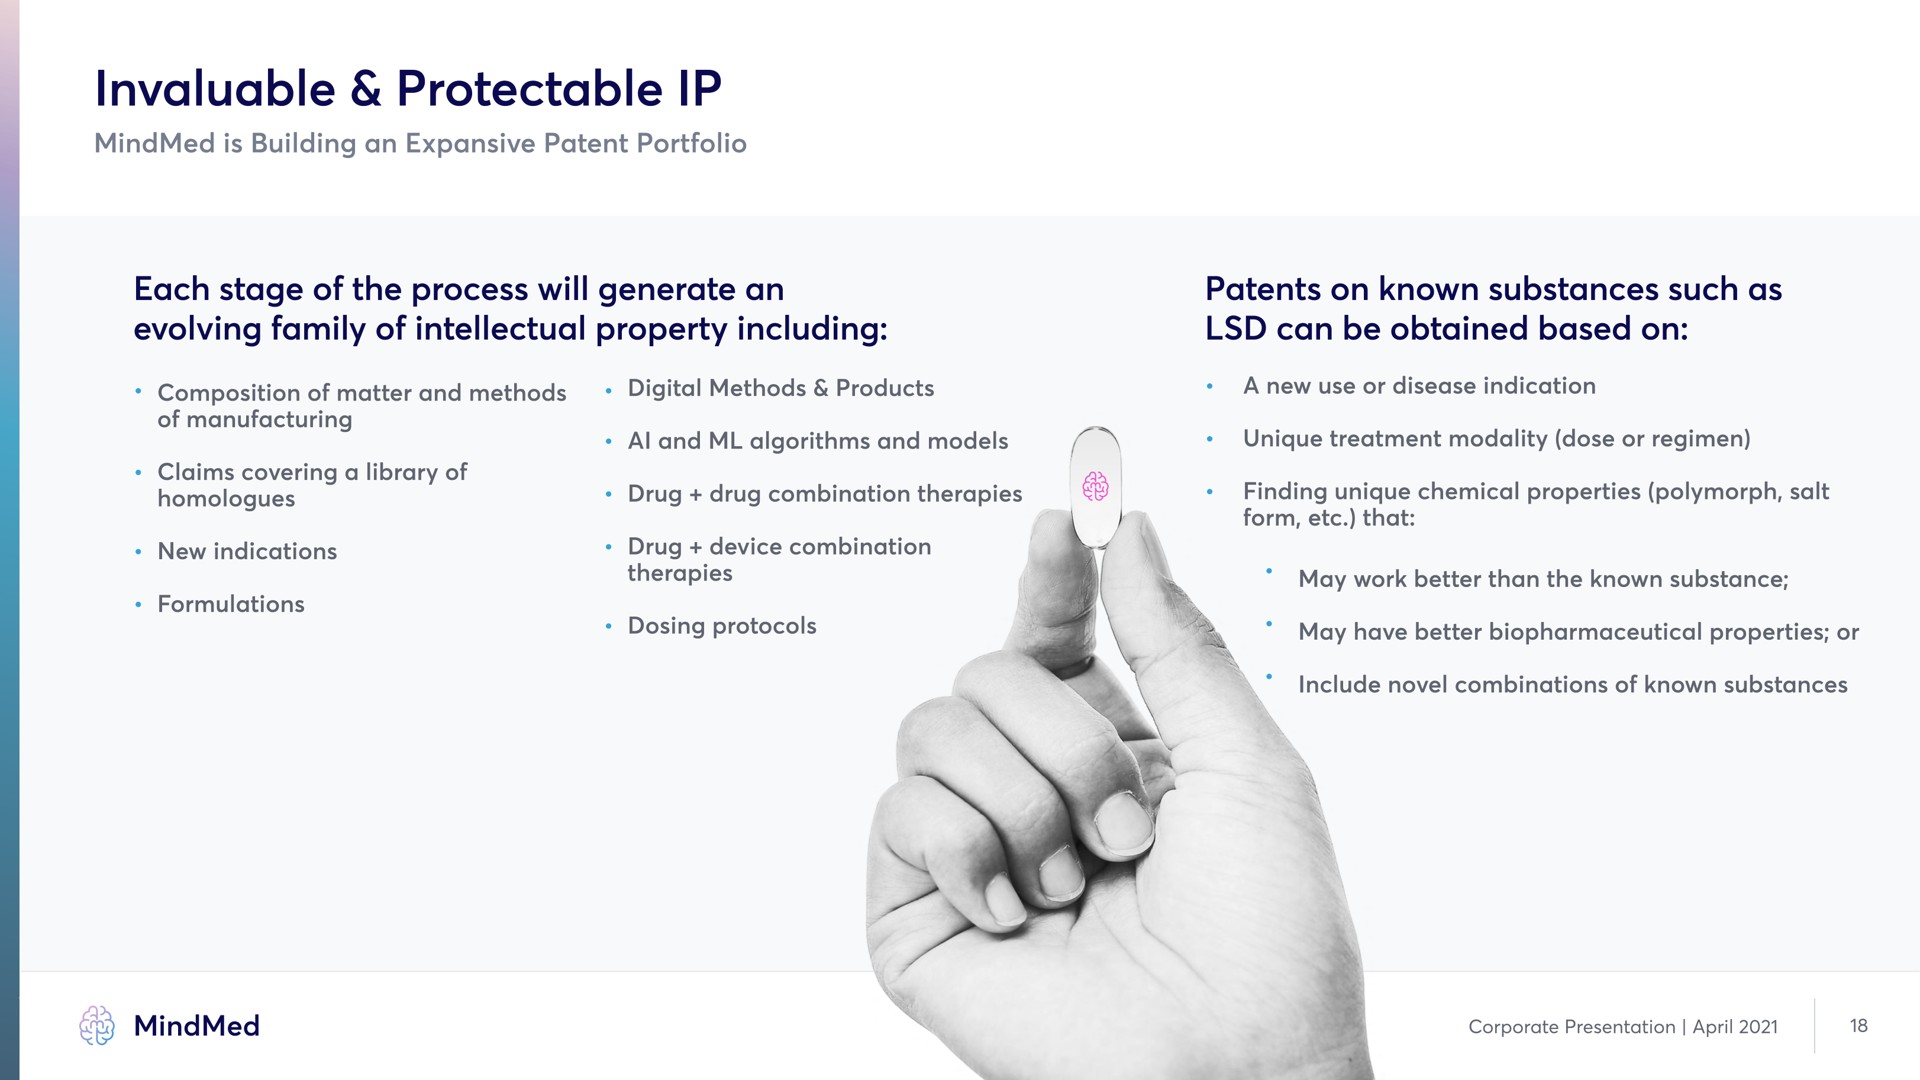 invaluable each stage of the process will generate an evolving family of intellectual property including patents on known substances such as can be obtained based on | MindMed